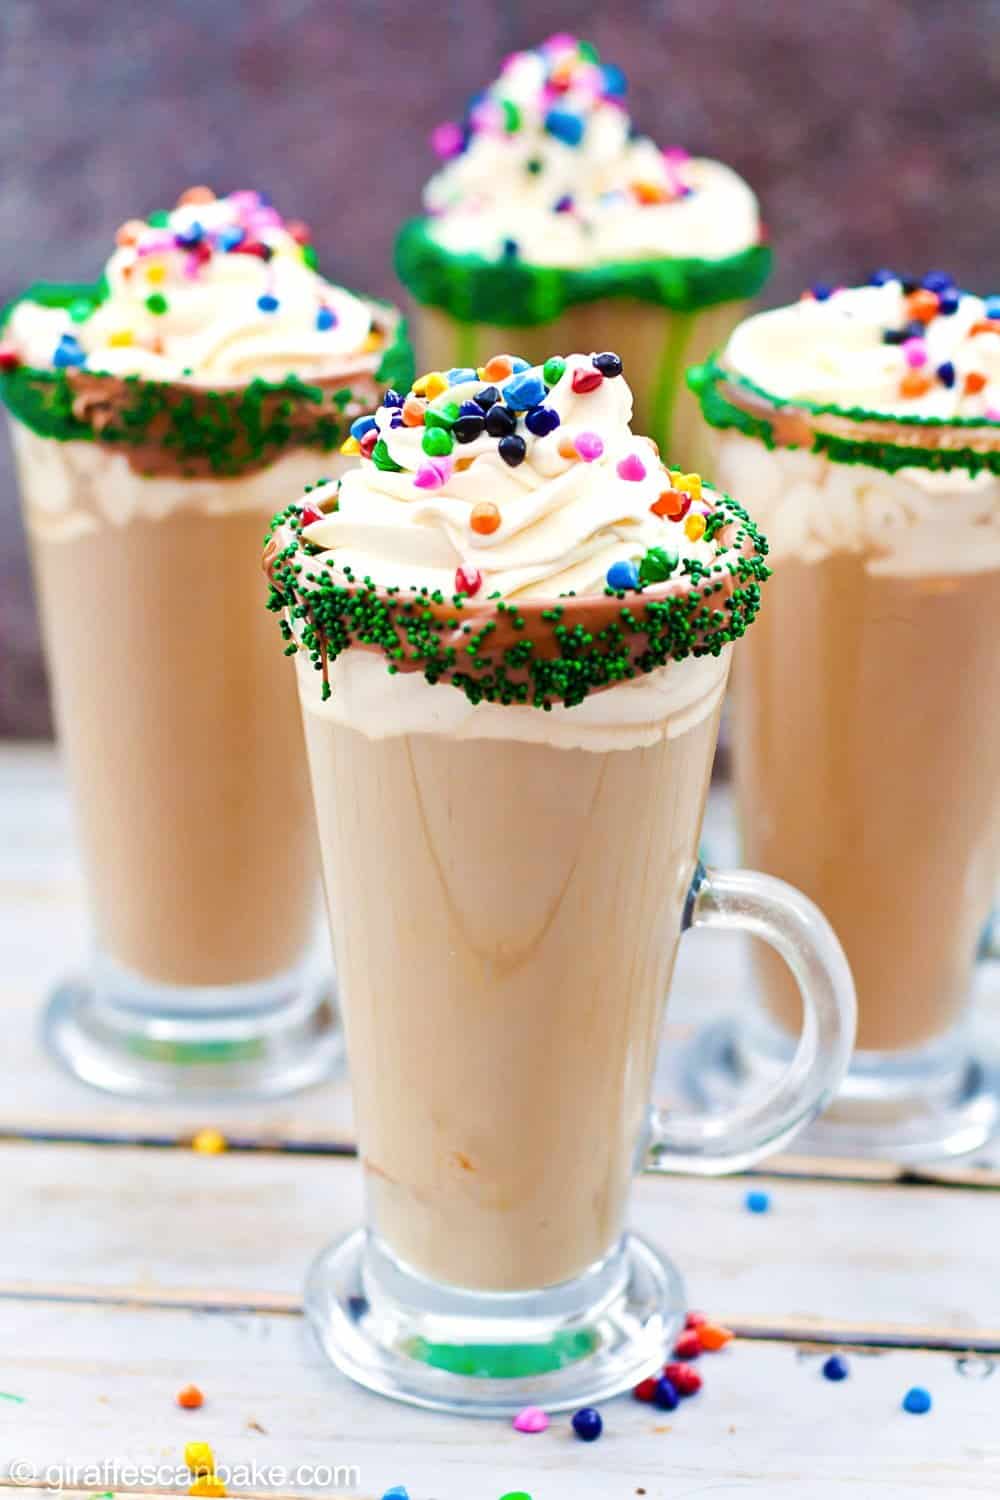 Four glasses of Mint Irish Latte decorated with sprinkles